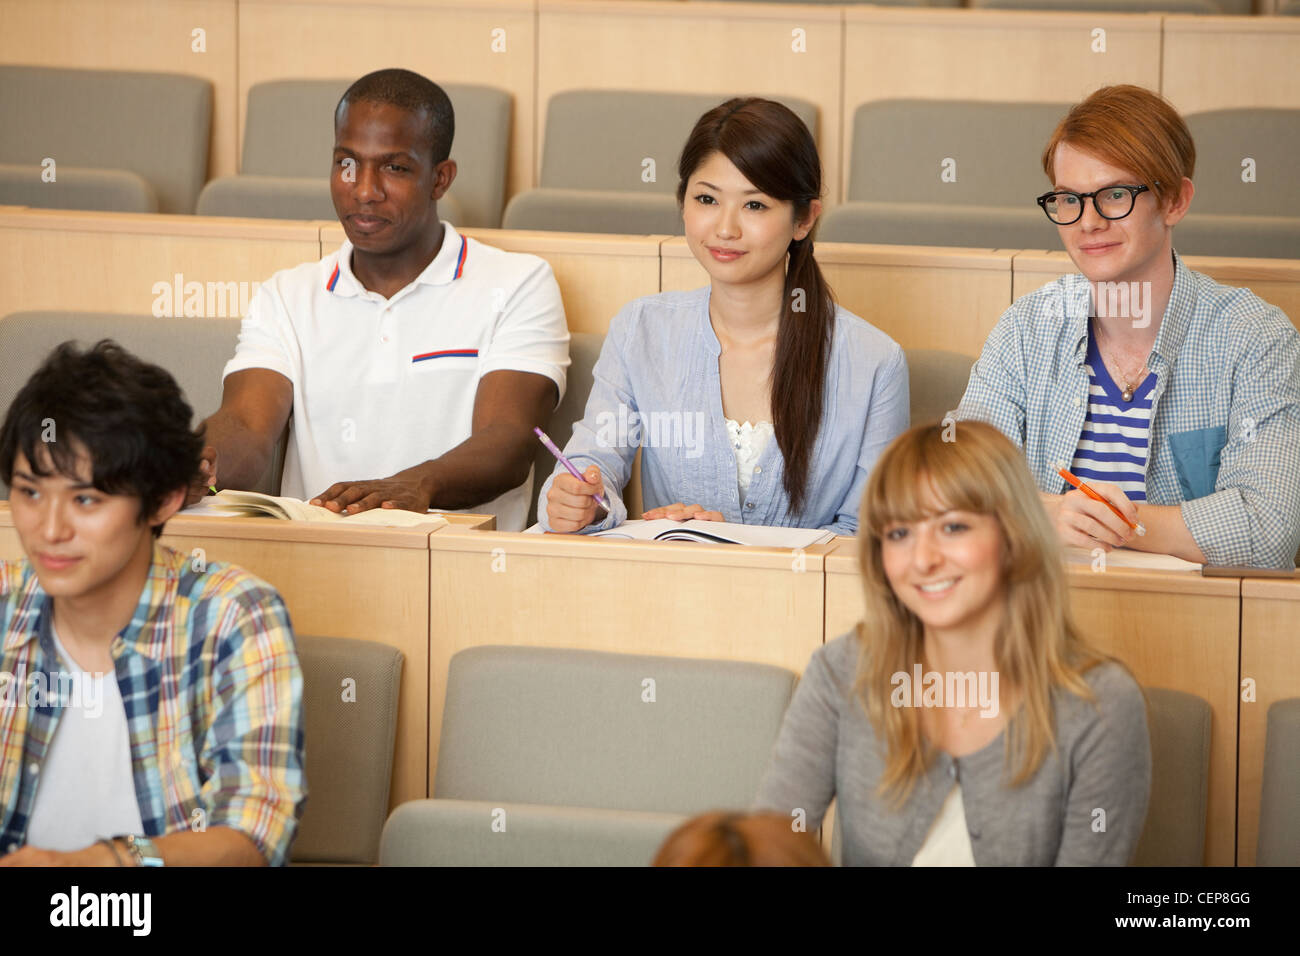 University students studying in lecture theater Stock Photo